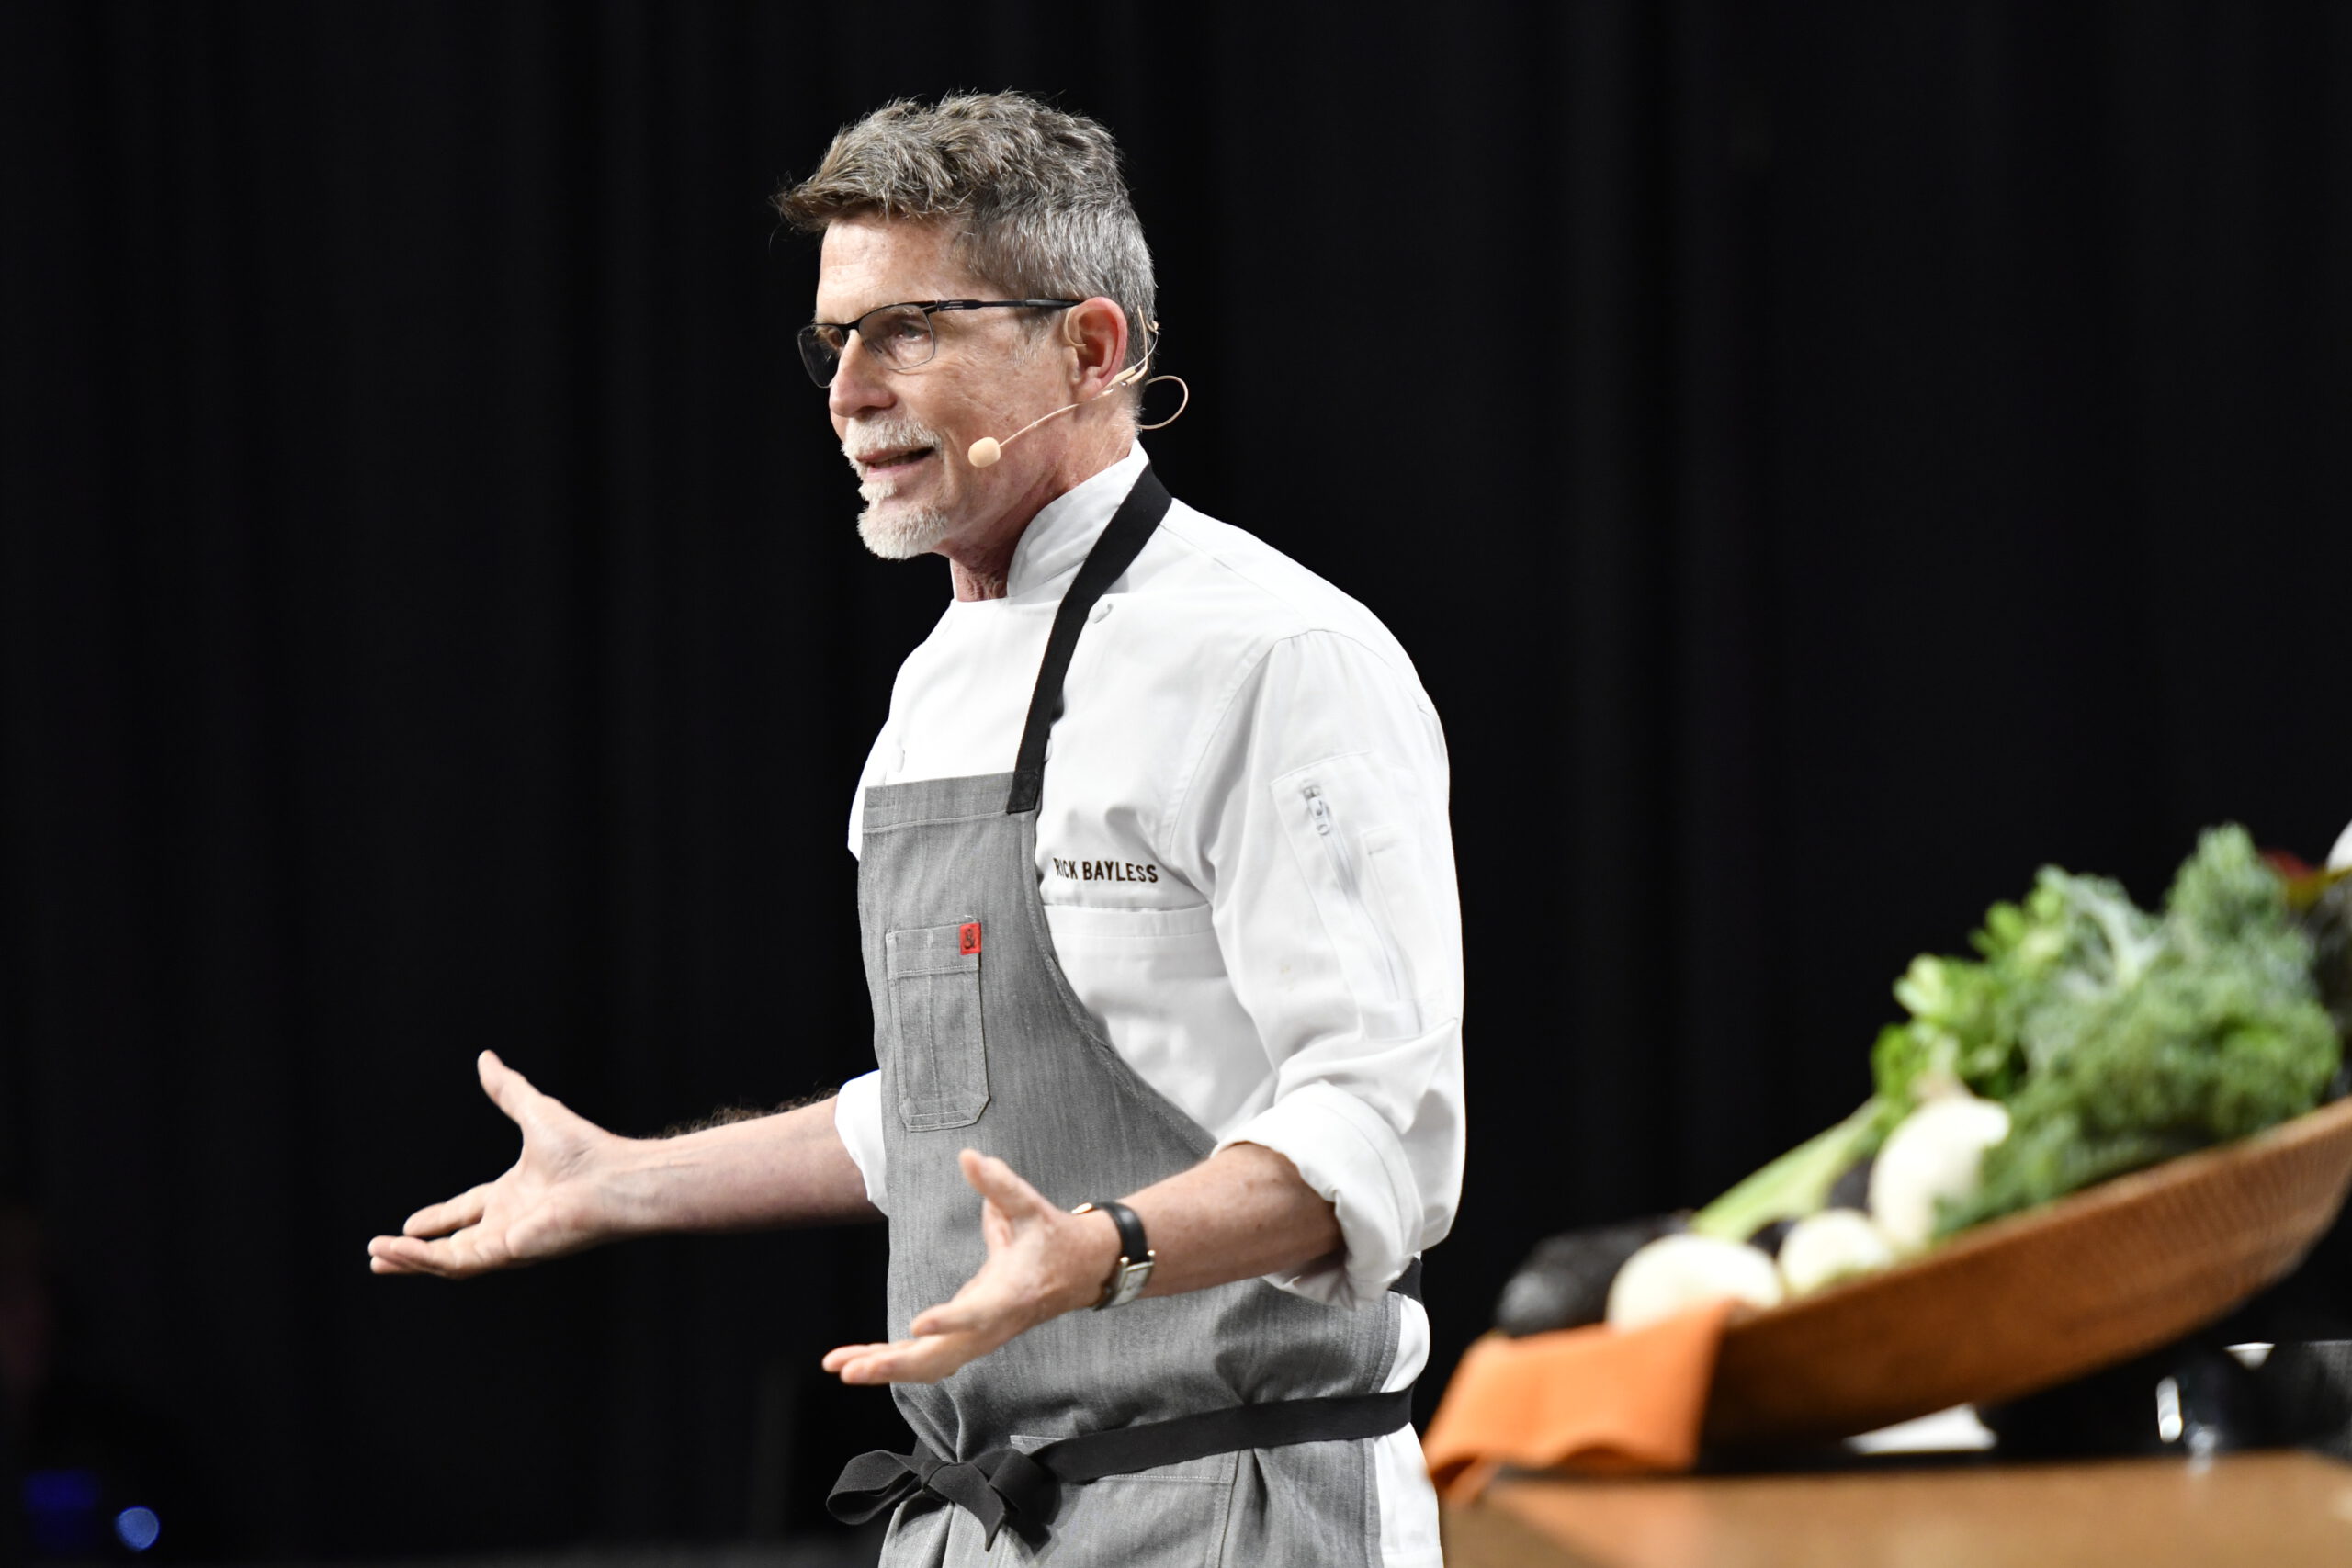 Rick Bayless shares tips for flavorful tacos, his favorite Mexican pantry staples